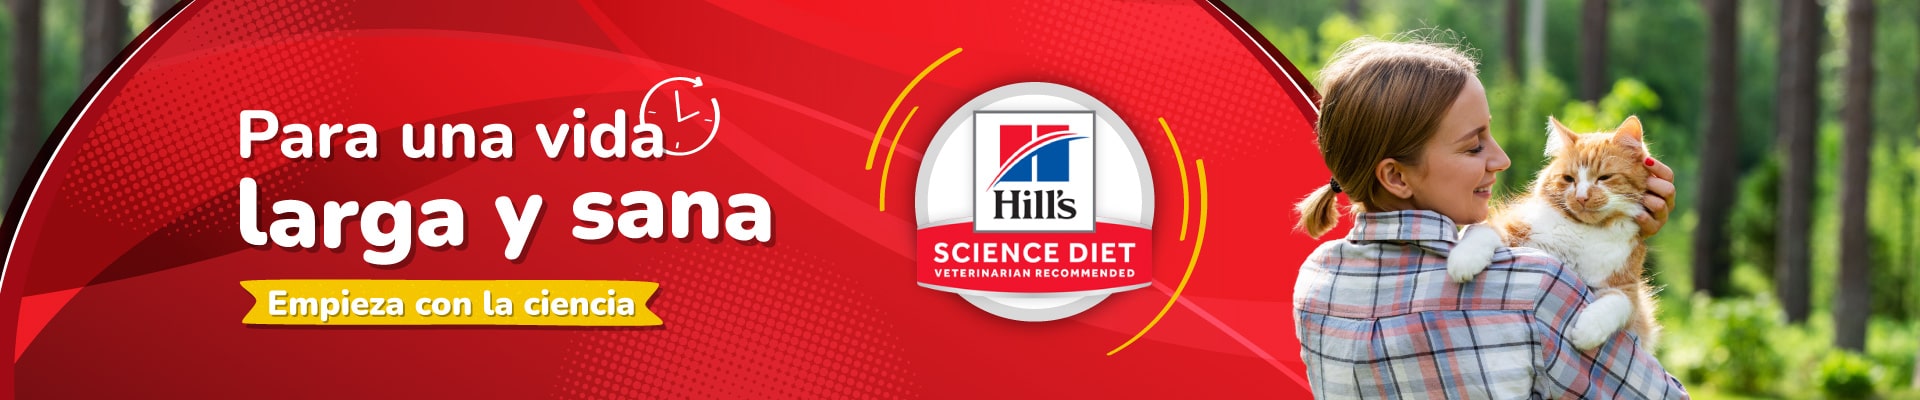 Hill's Science Diet - Agrocampo